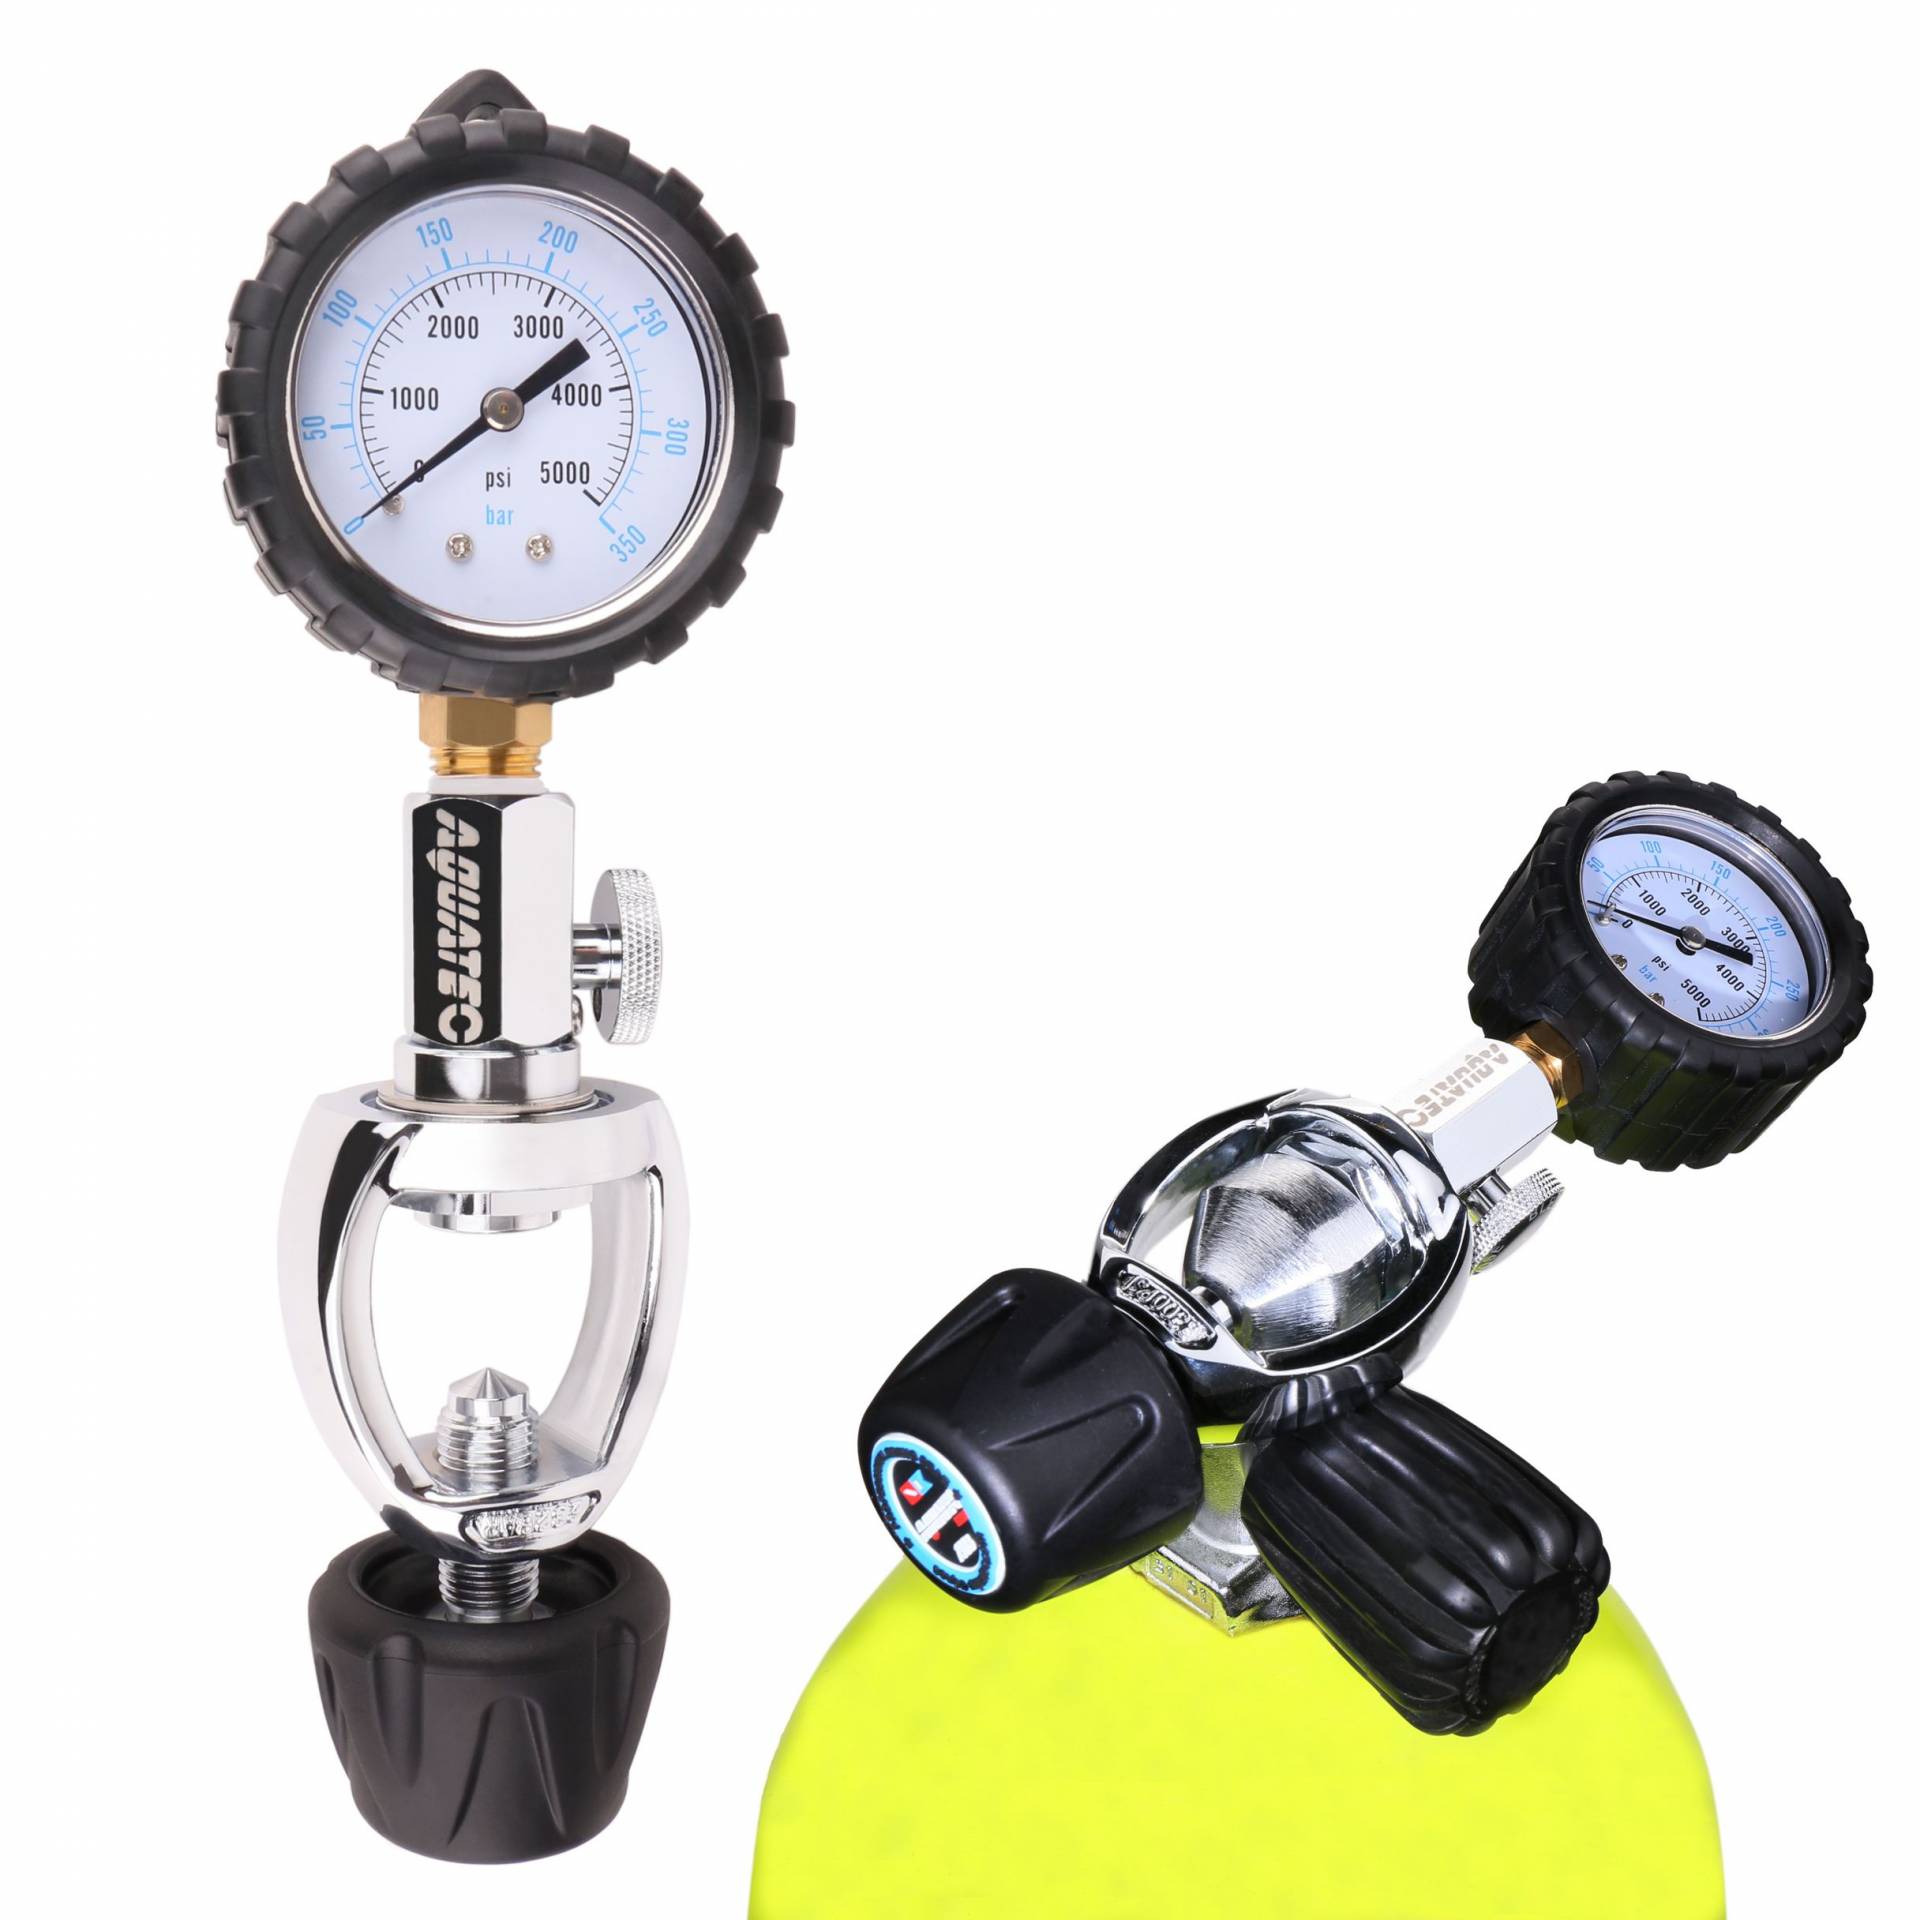 5000 PSI Cylinder Pressure Tester SPG Imperial and Metric Sopras Sub Scuba Diving Tank Checker Yoke 350 BAR 